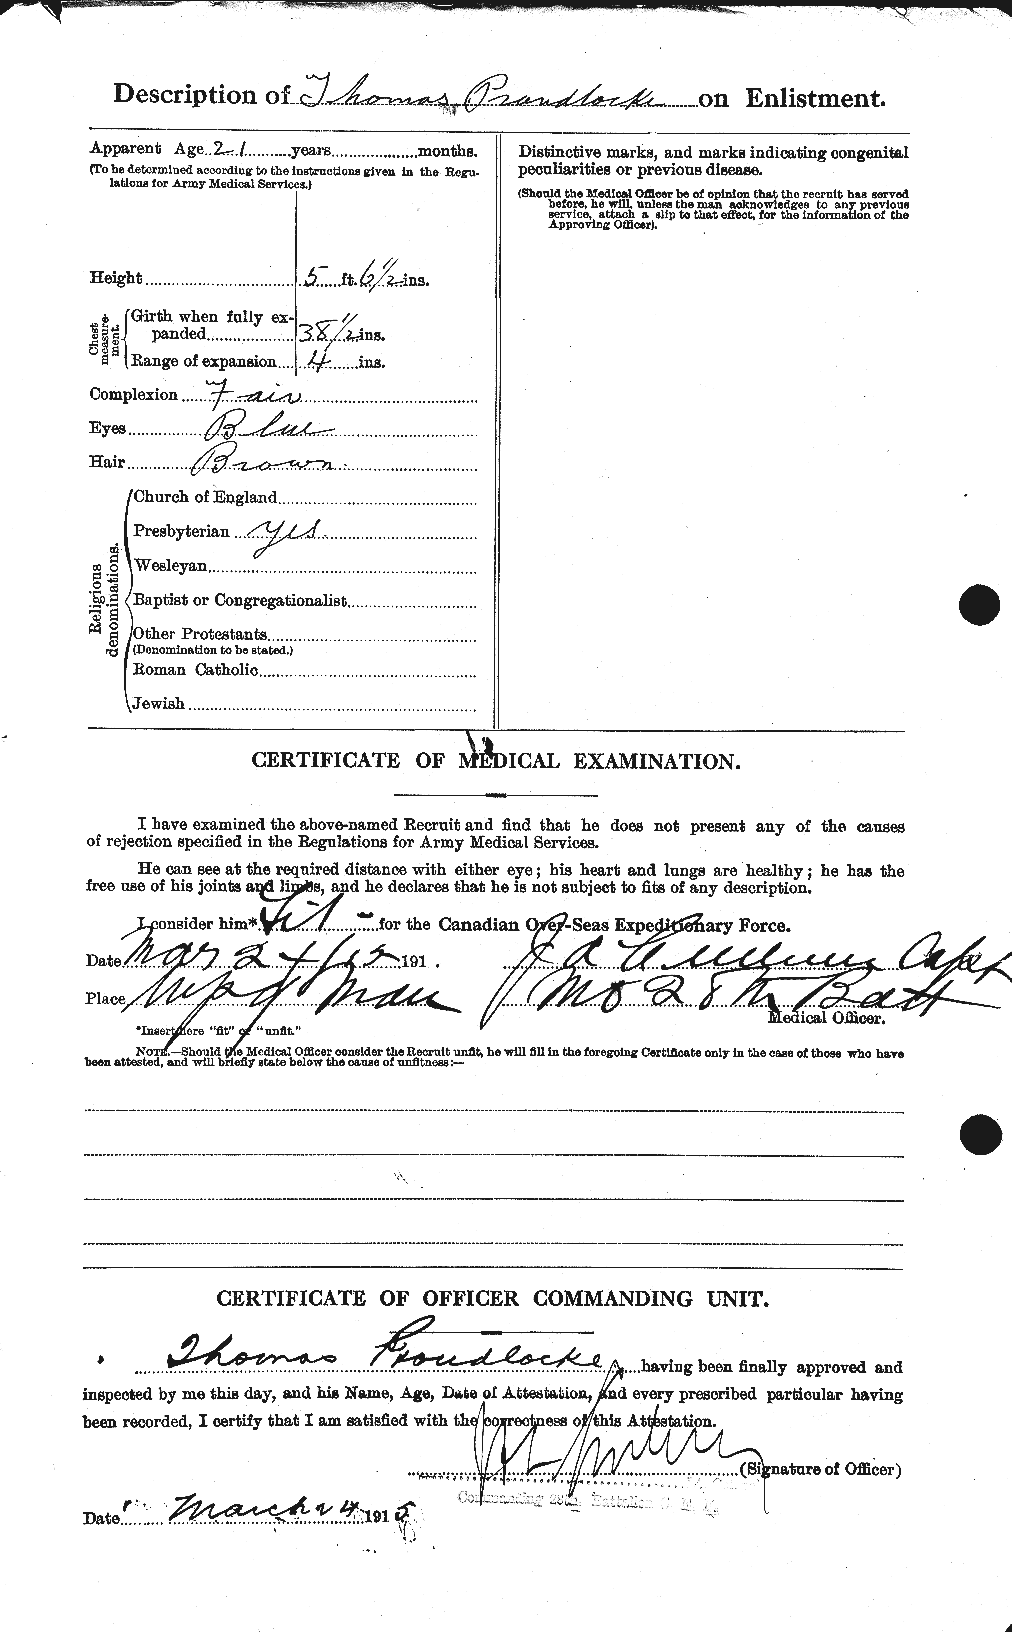 Personnel Records of the First World War - CEF 591487b